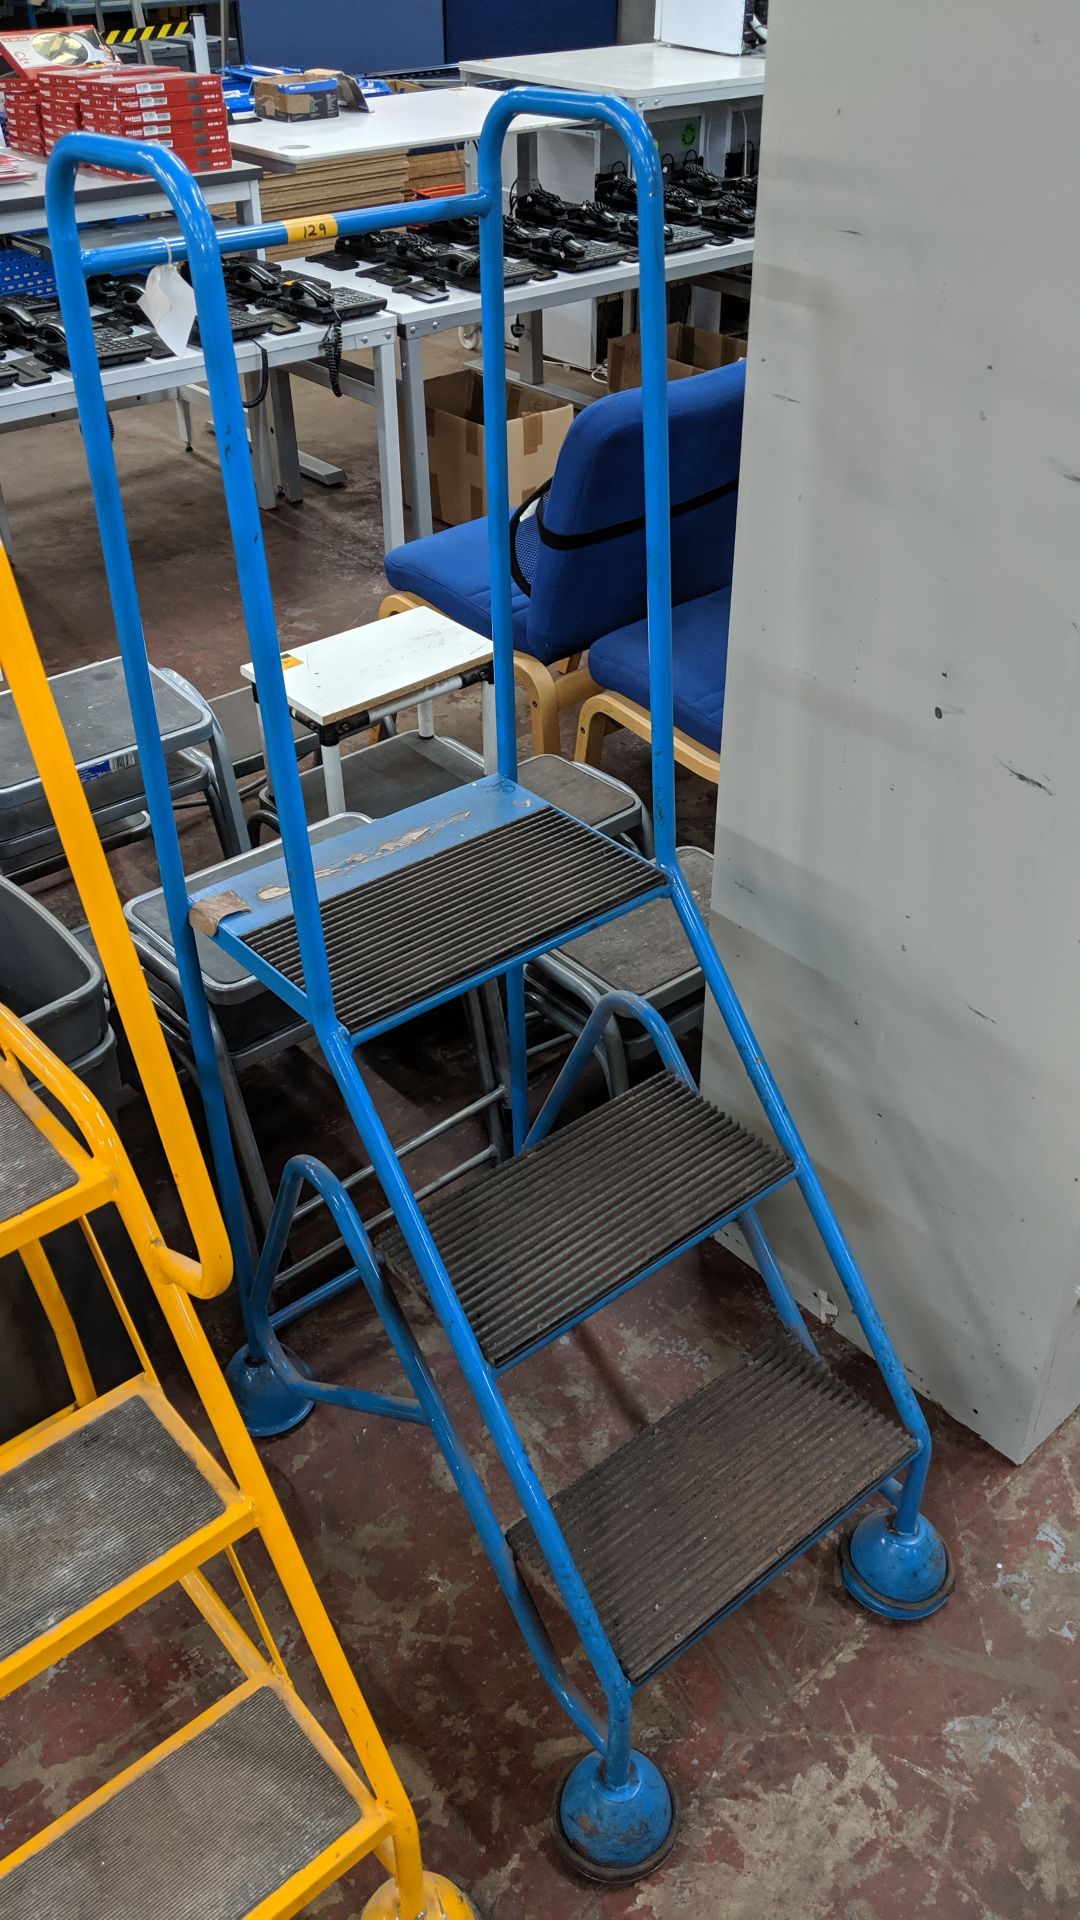 Blue mobile metal access/mini library steps. This is one of a large number of lots being sold on